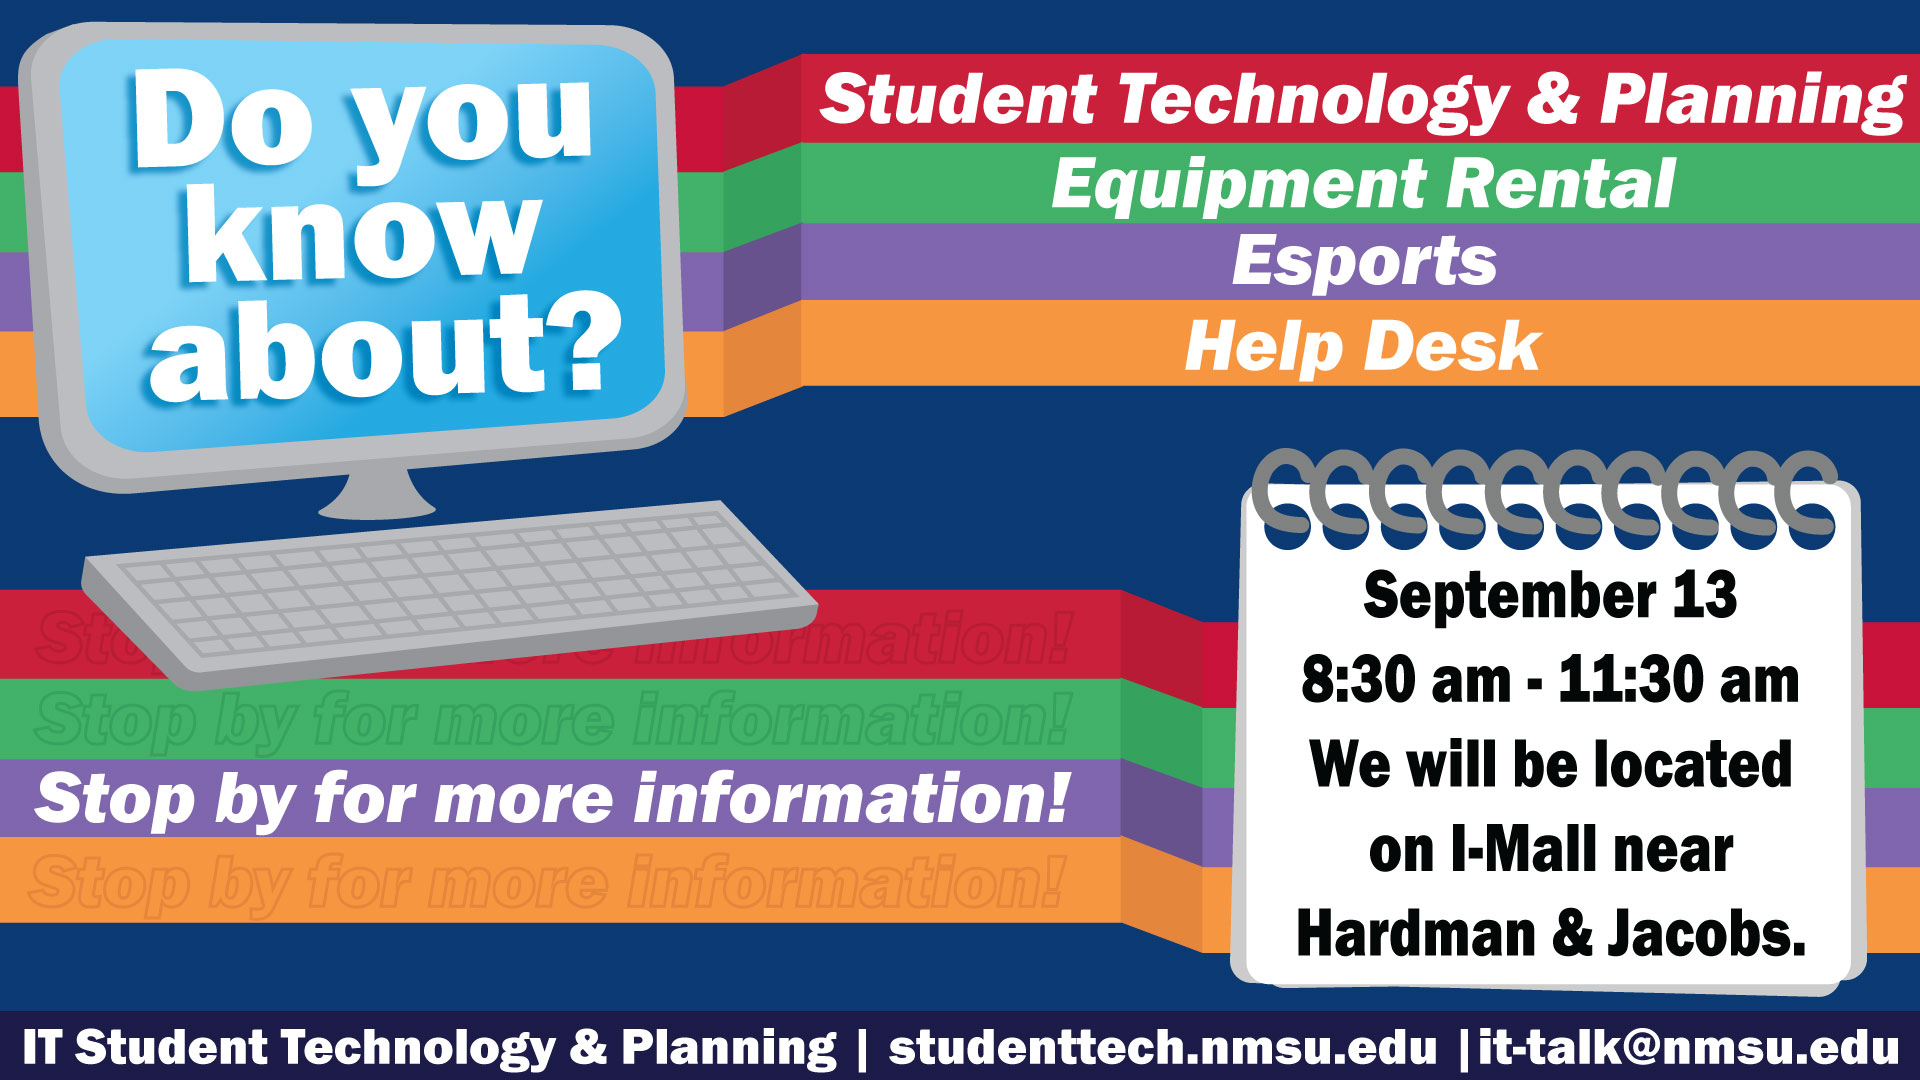 Do you know about Student Technology & Planning, Equipment Rental, Esports, or the IT Help Desk? Stop by for more information! September 13, 8:30 - 11:30 am, located on the I-Mall near Hardman & Jacobs.